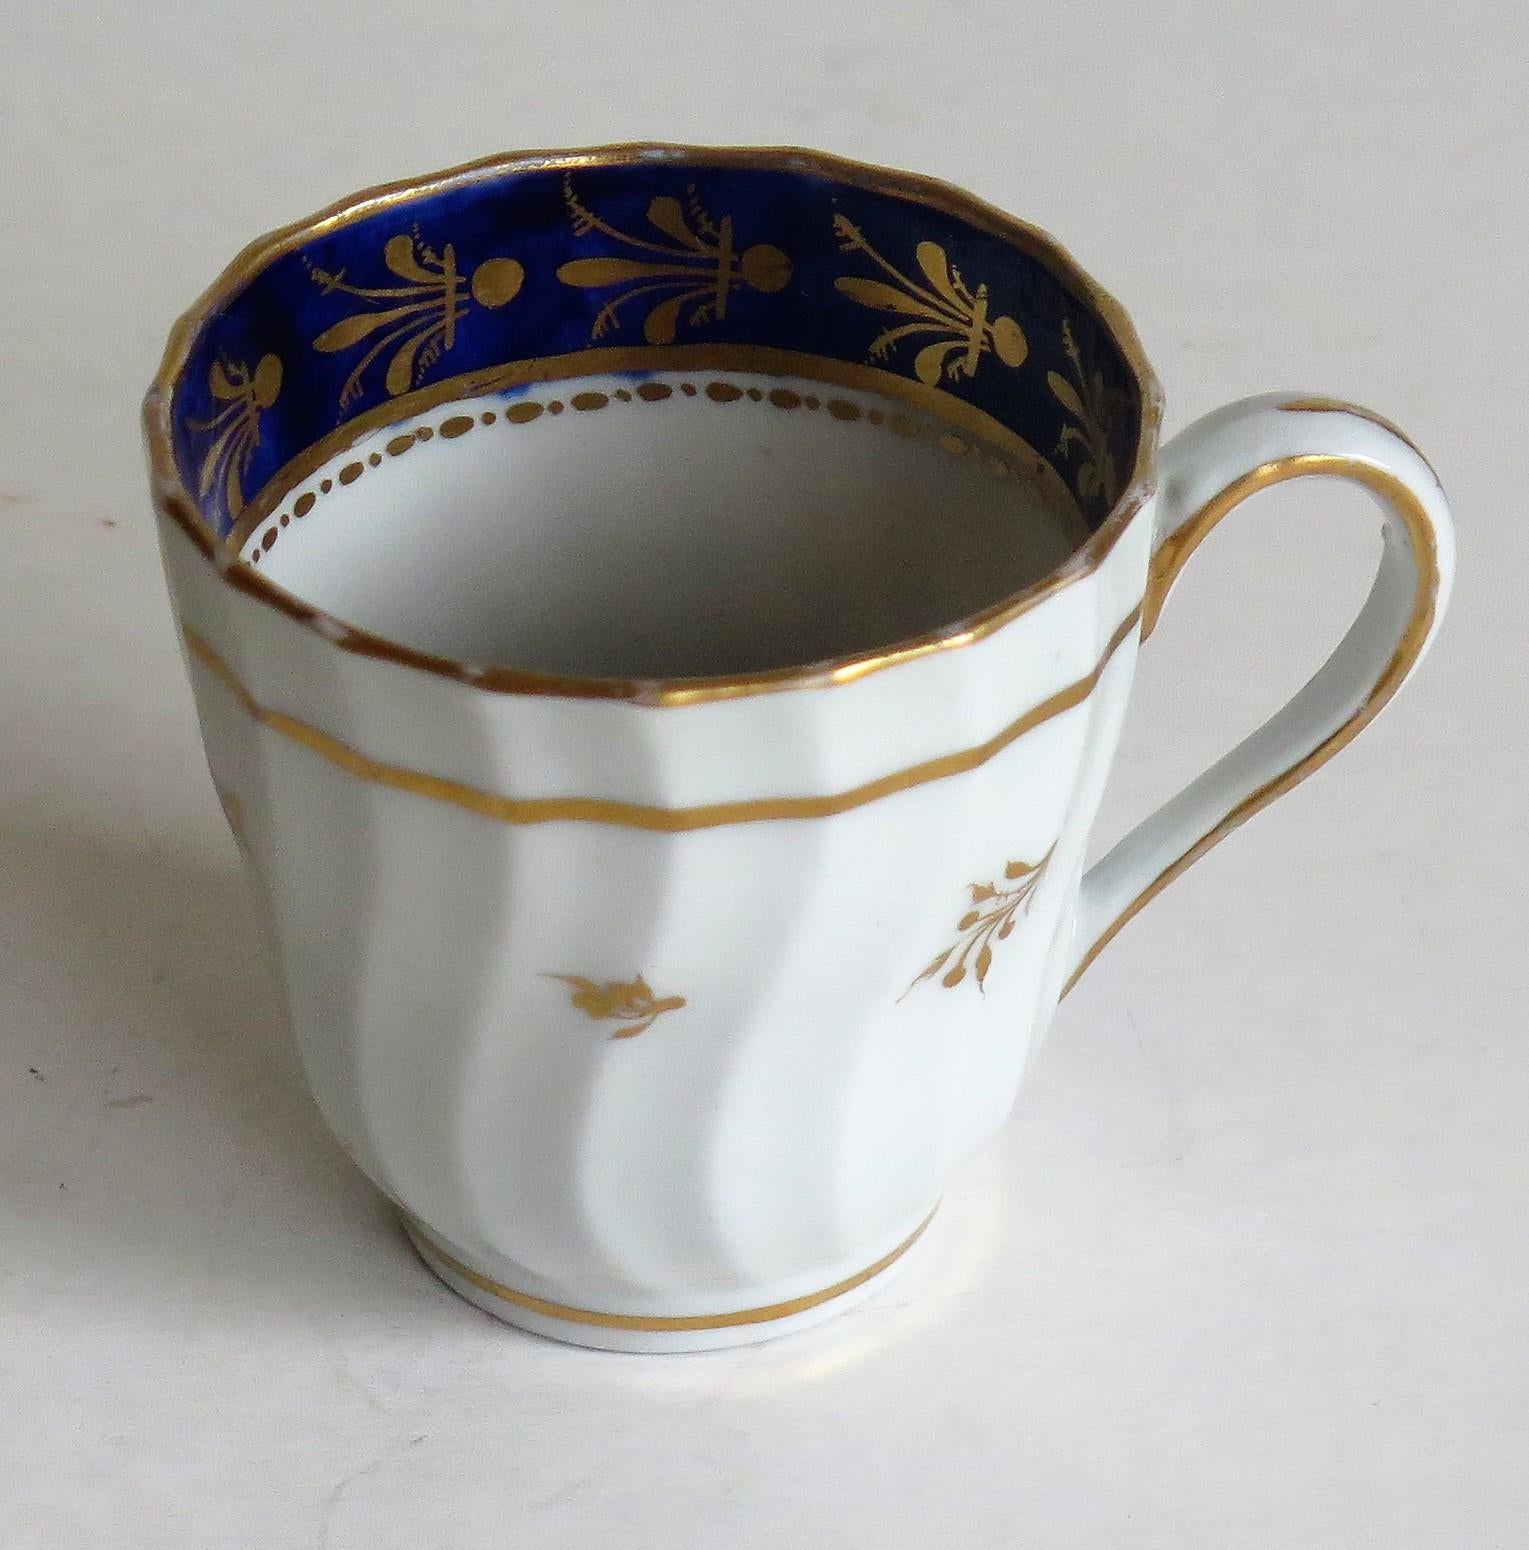 New Hall Porcelain Coffee Cup Shanked and Fluted Body Hand-Painted, circa 1795 4